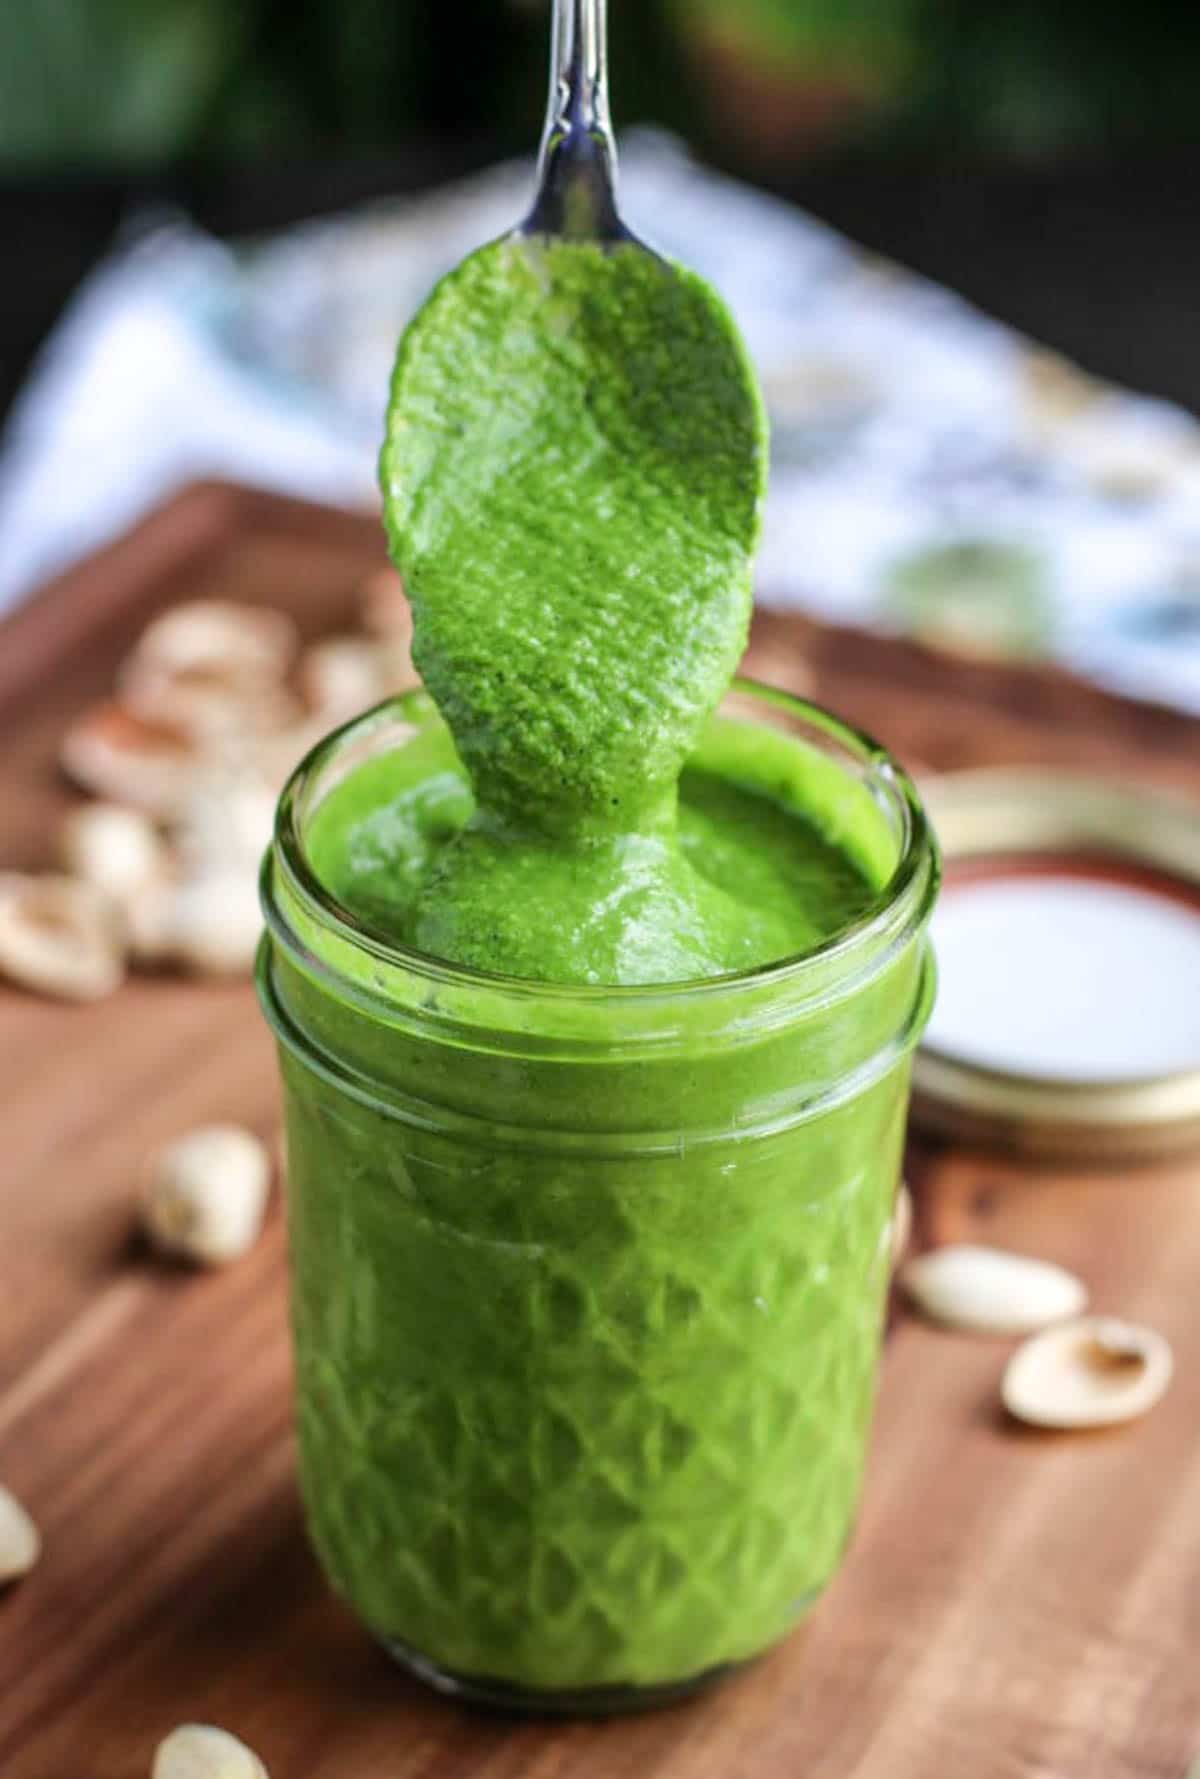 A close up view of a spoon dipping into a mason jar filled with green pistachio sauce. 